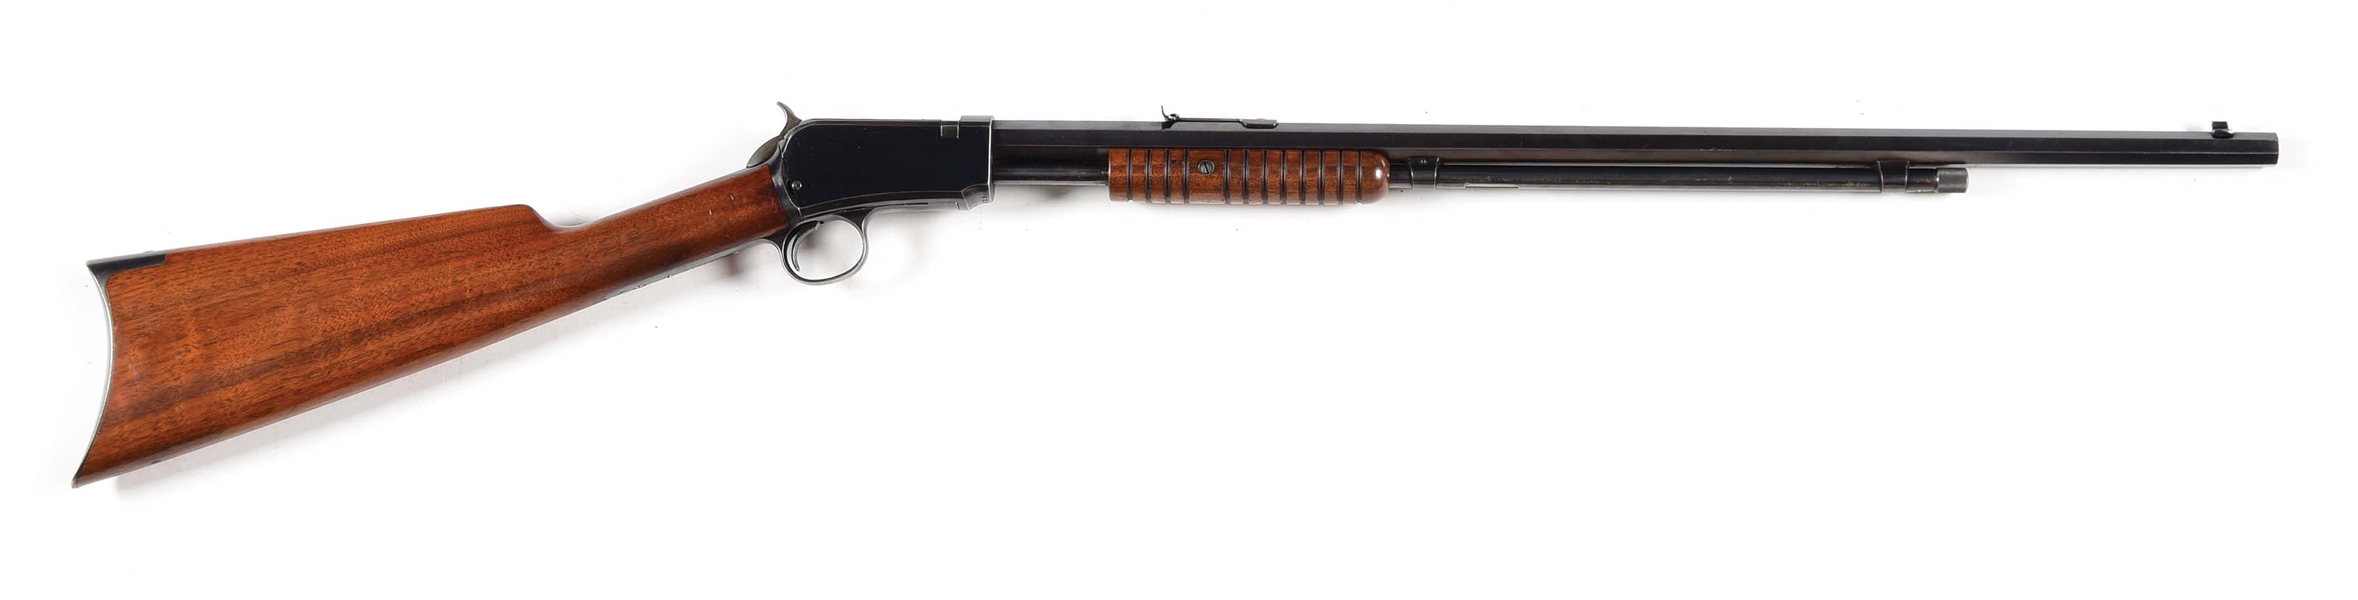 (C) WINCHESTER 1890 SLIDE ACTION RIFLE (1910).